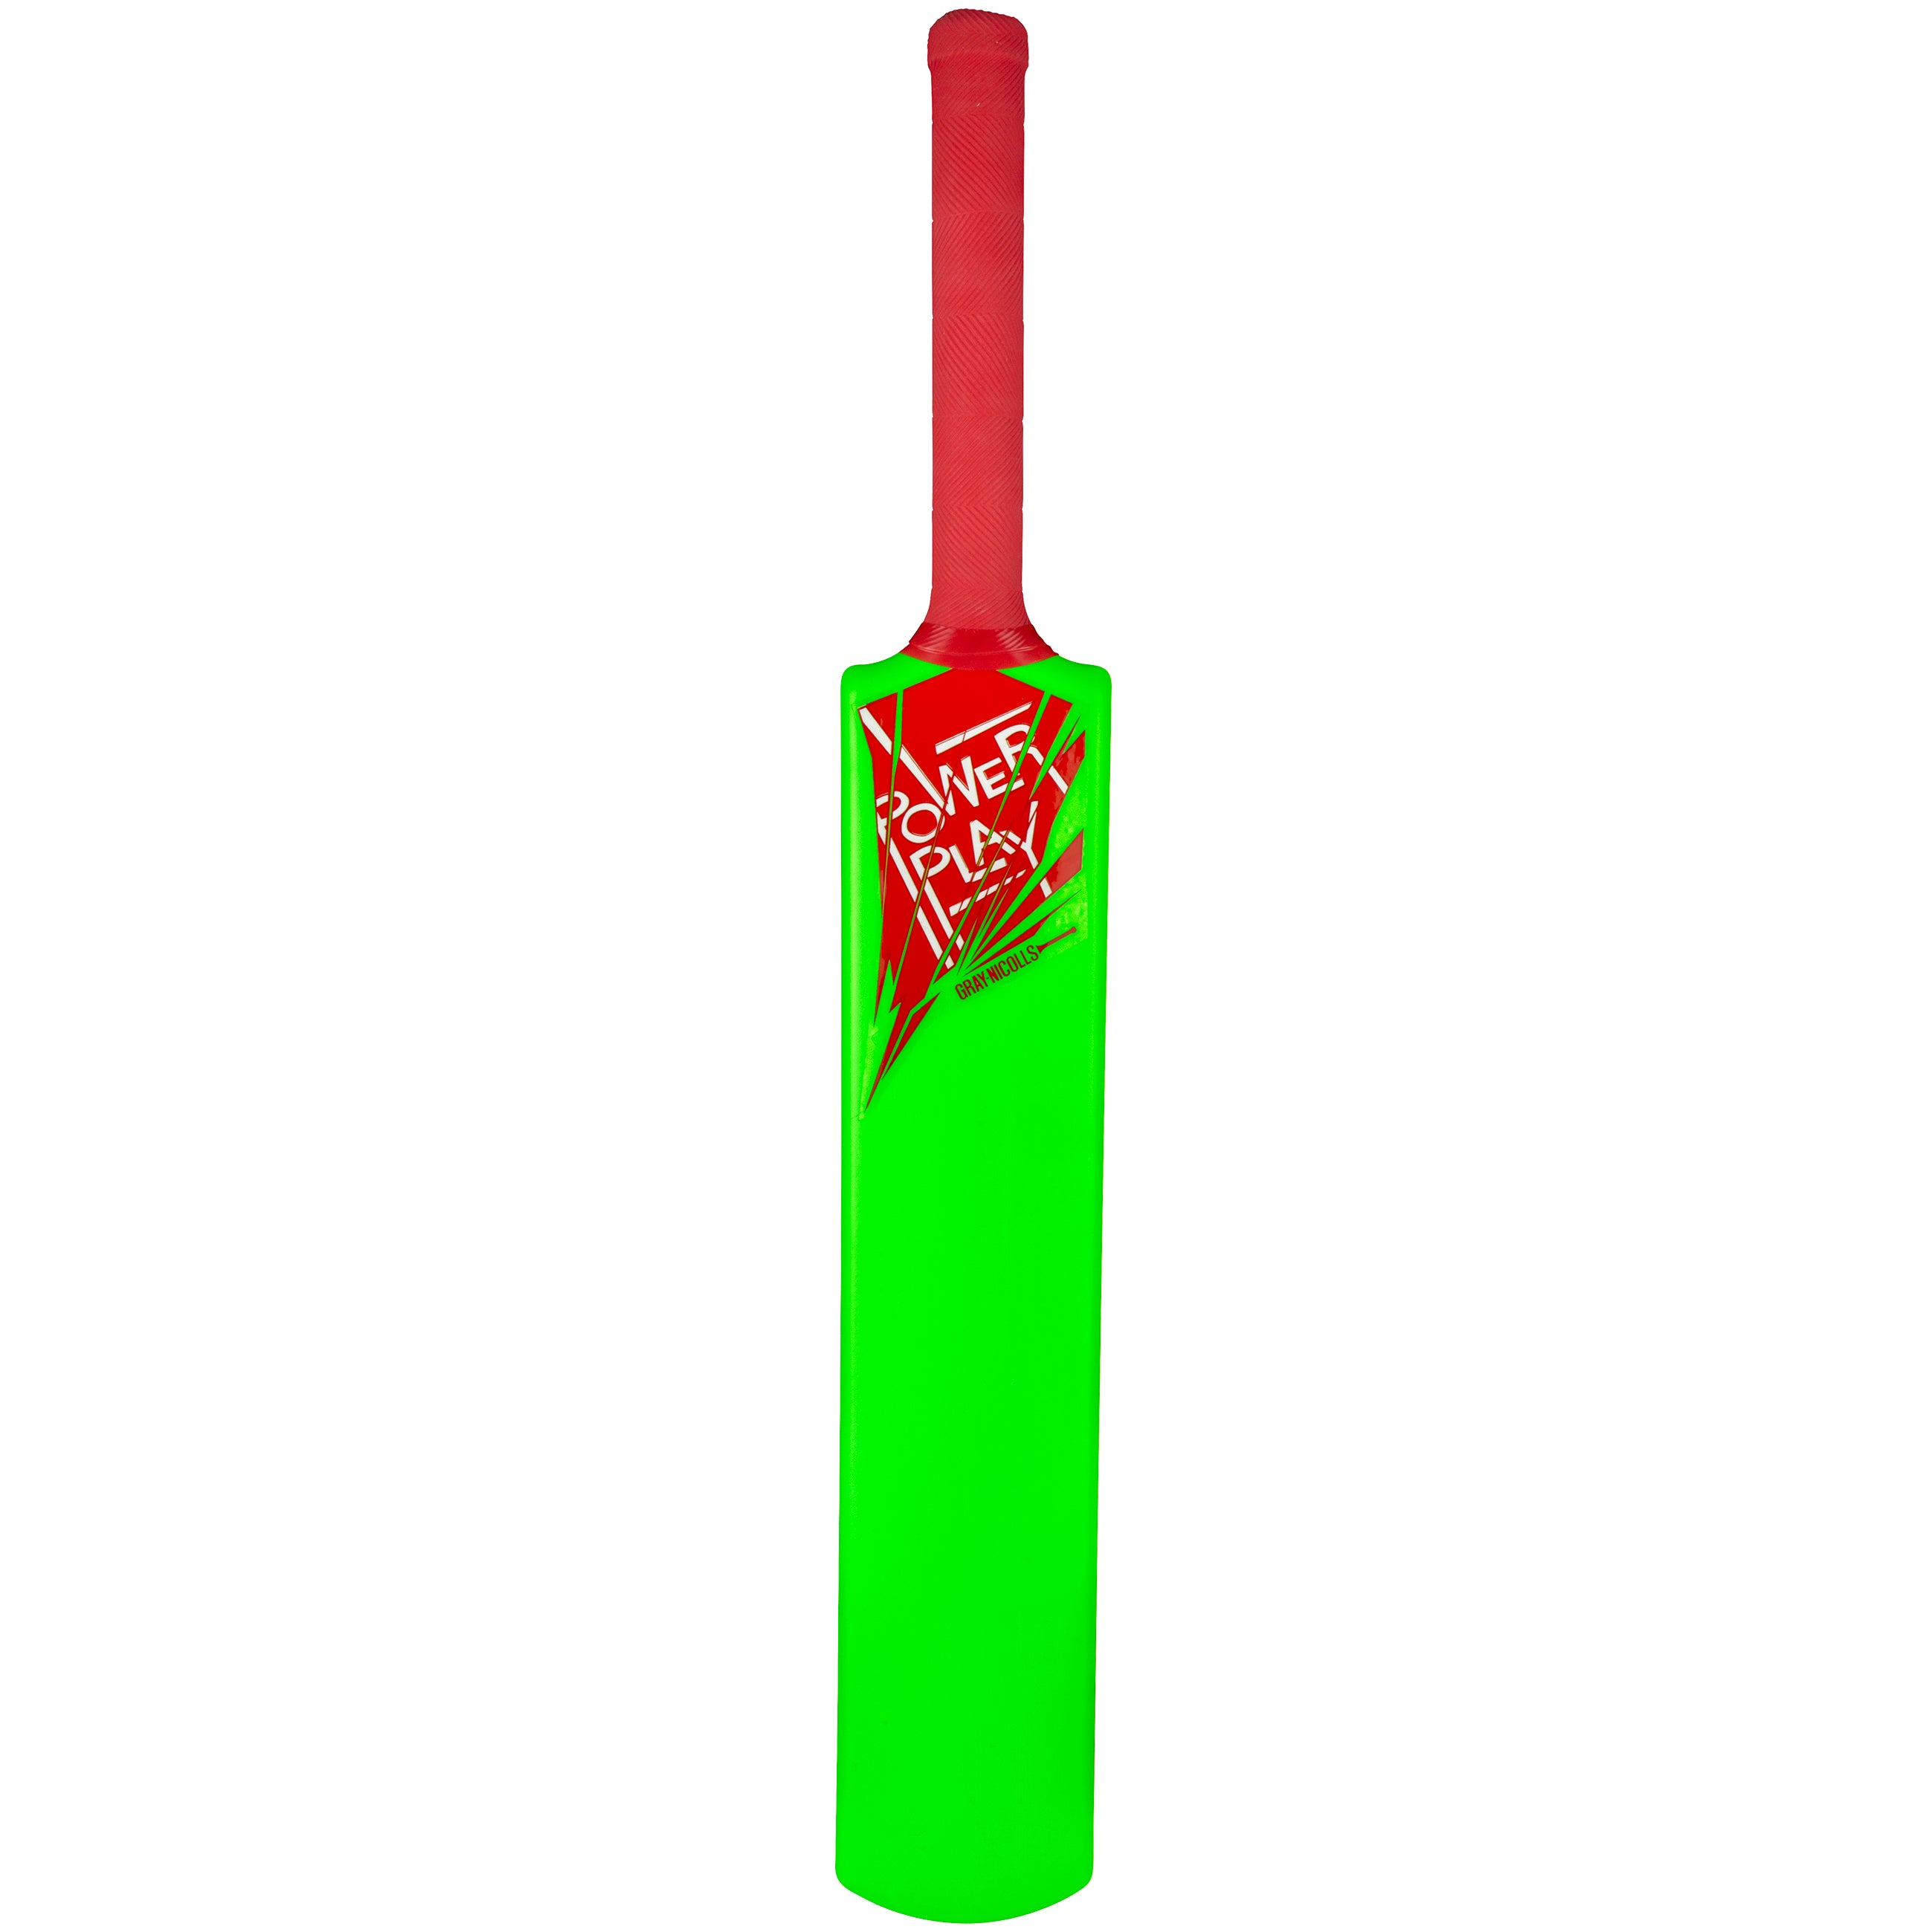 2600 CNBA20 5802553 Plastic Power Play Bat Green Size 3 Front